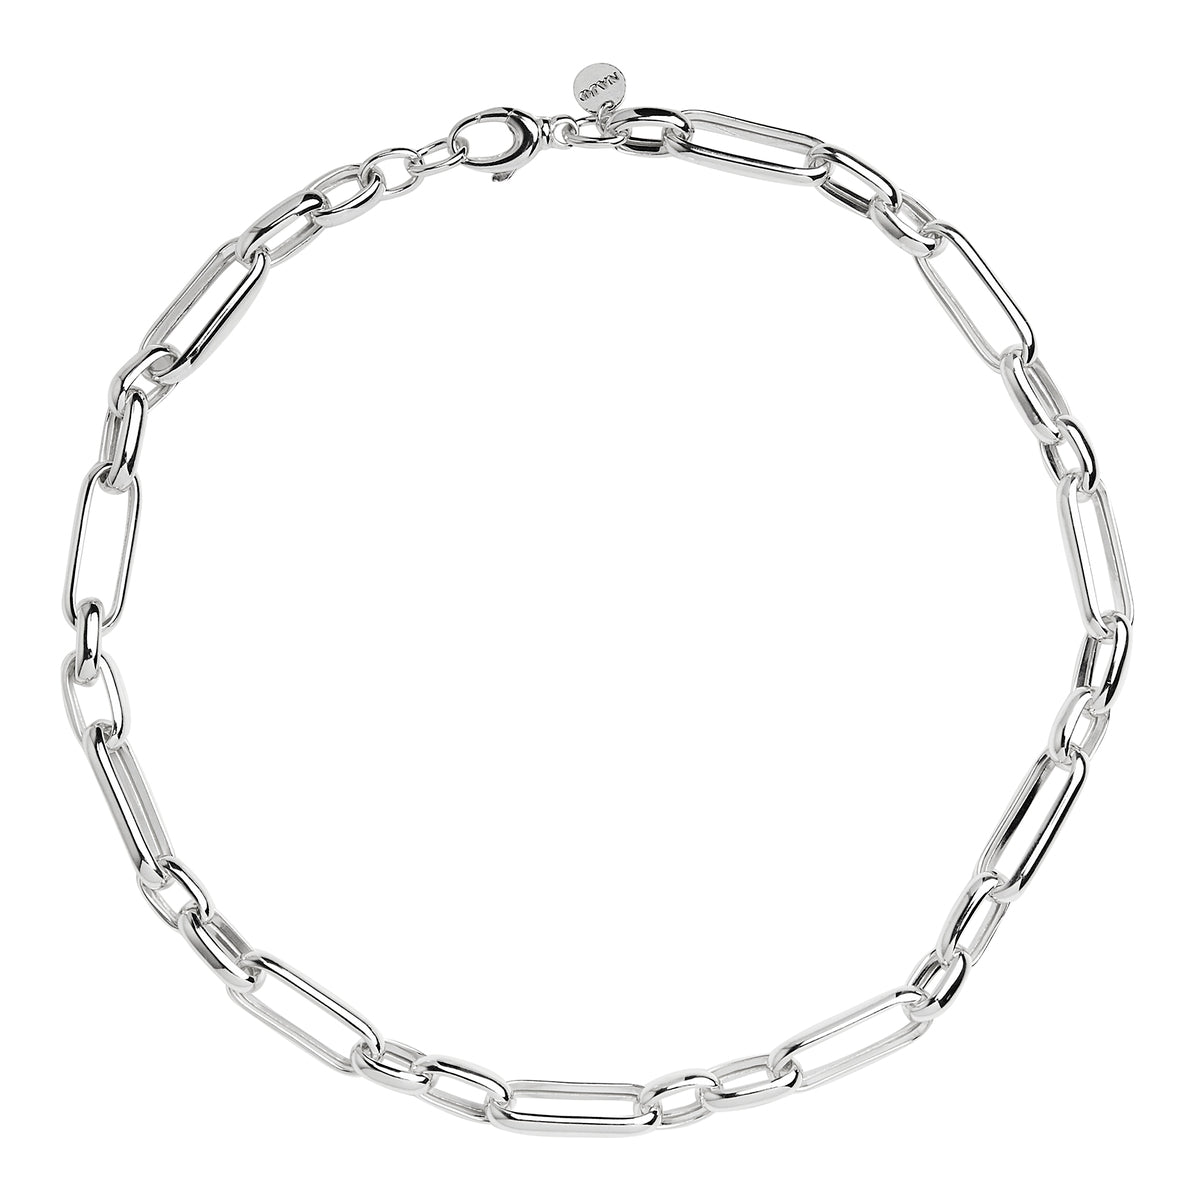 10mm Wide Silver Elongated Link Chain Necklace With Large Parrot Clasp, 45cm